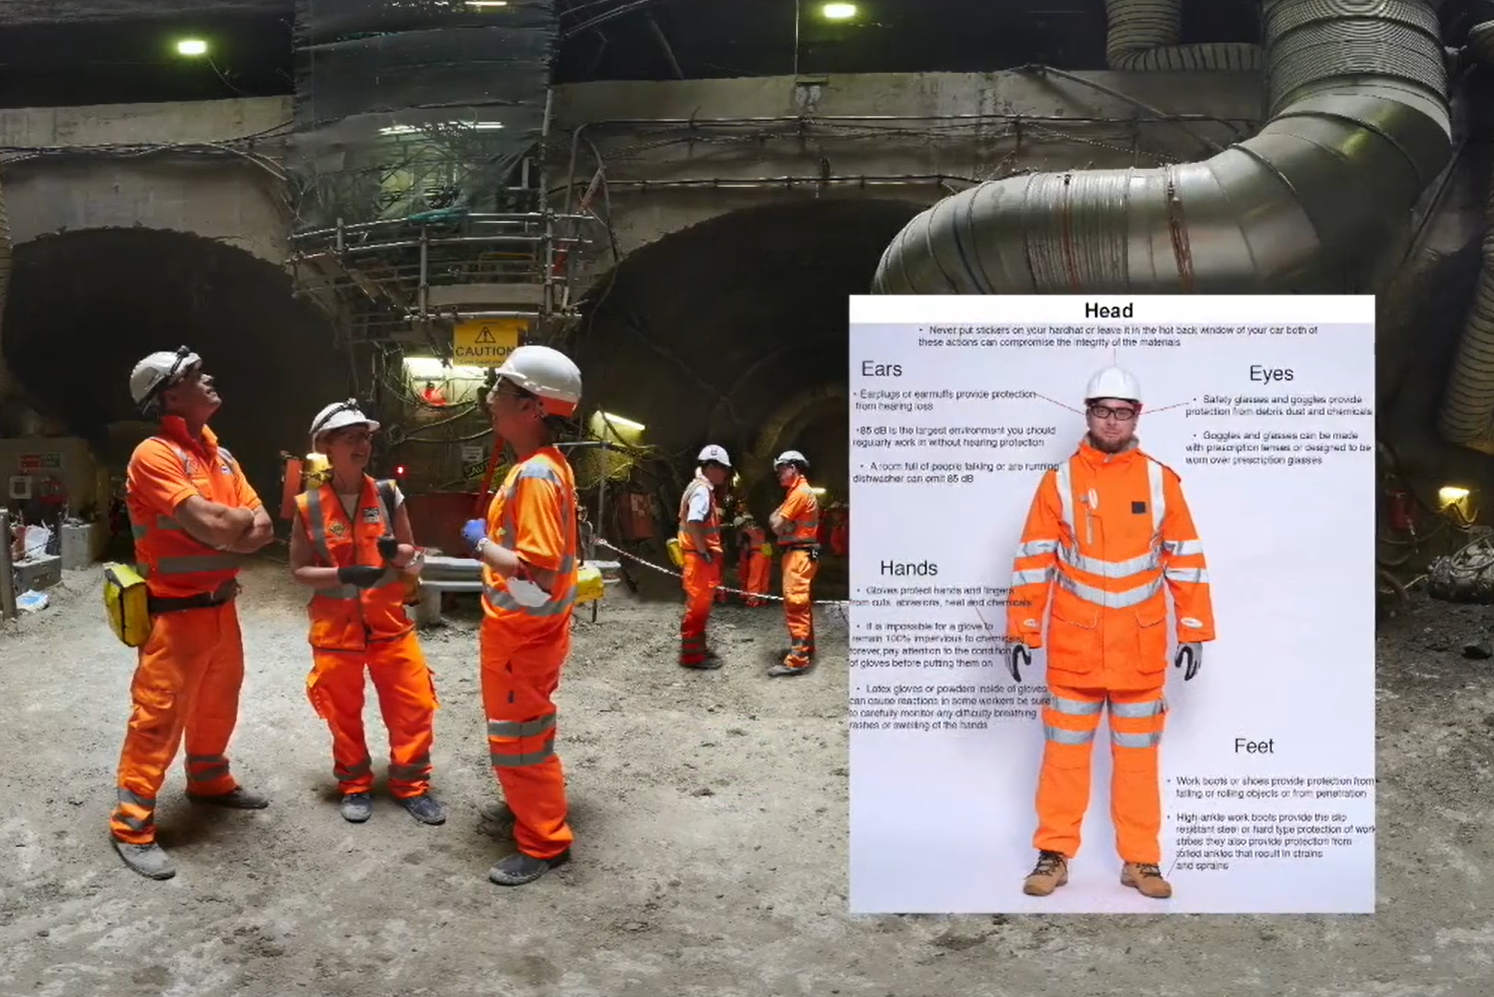 Immersive learning experience based on a tunnel construction site with a graphic which shows the different kinds of PPE required on site.